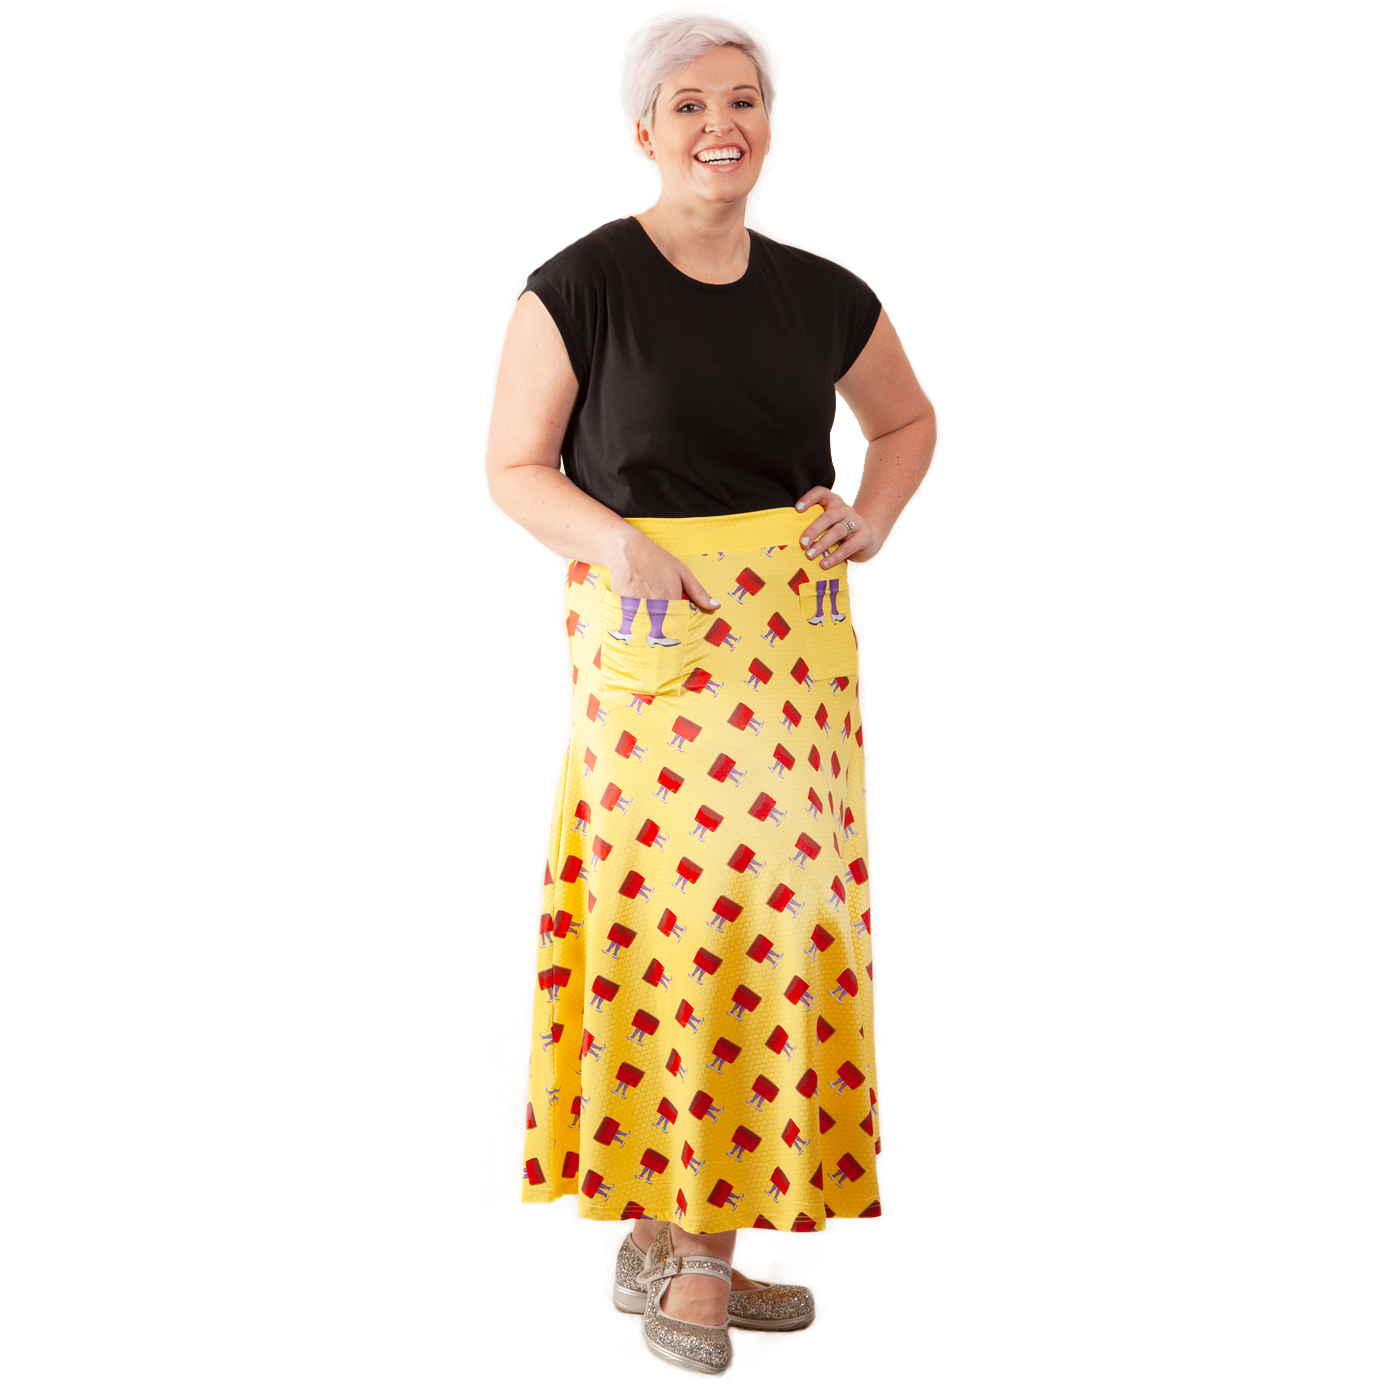 Kansas Maxi Skirt by RainbowsAndFairies.com (Wizard Oz - Maxi Skirt With Pockets - Yellow Brick Road - Evil Witch - Ruby Slippers) - SKU: CL_MAXIS_KNSAS_ORG - Pic 04